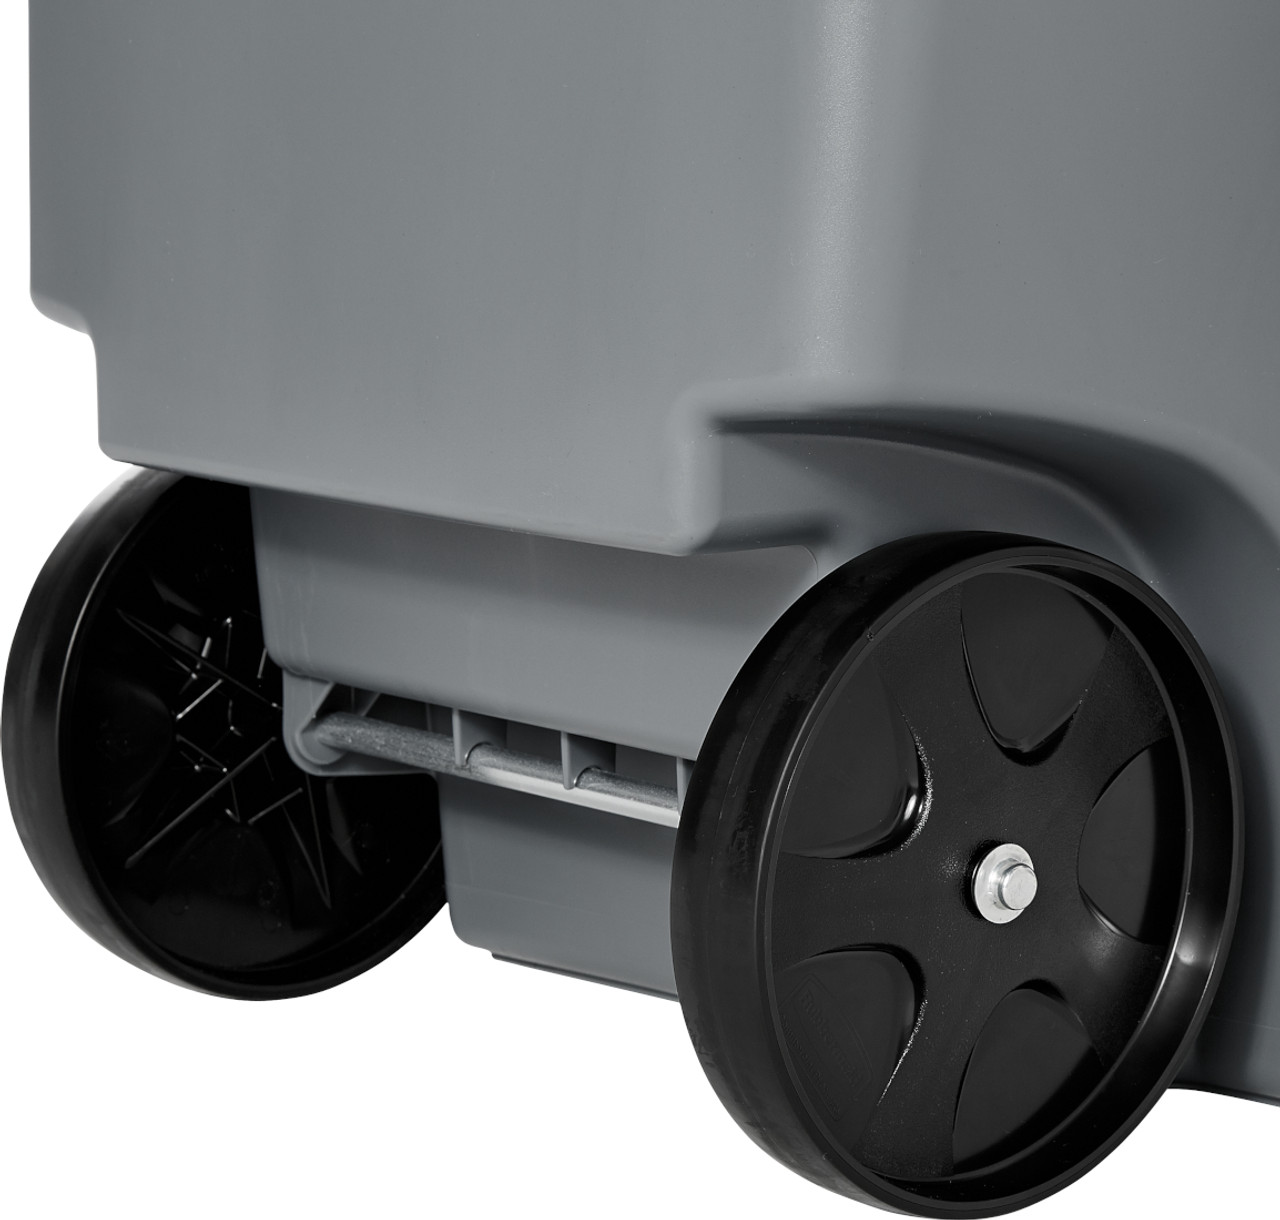 FG9W2700GRAY - Close up of Rubbermaid BRUTE Rollout Container castors